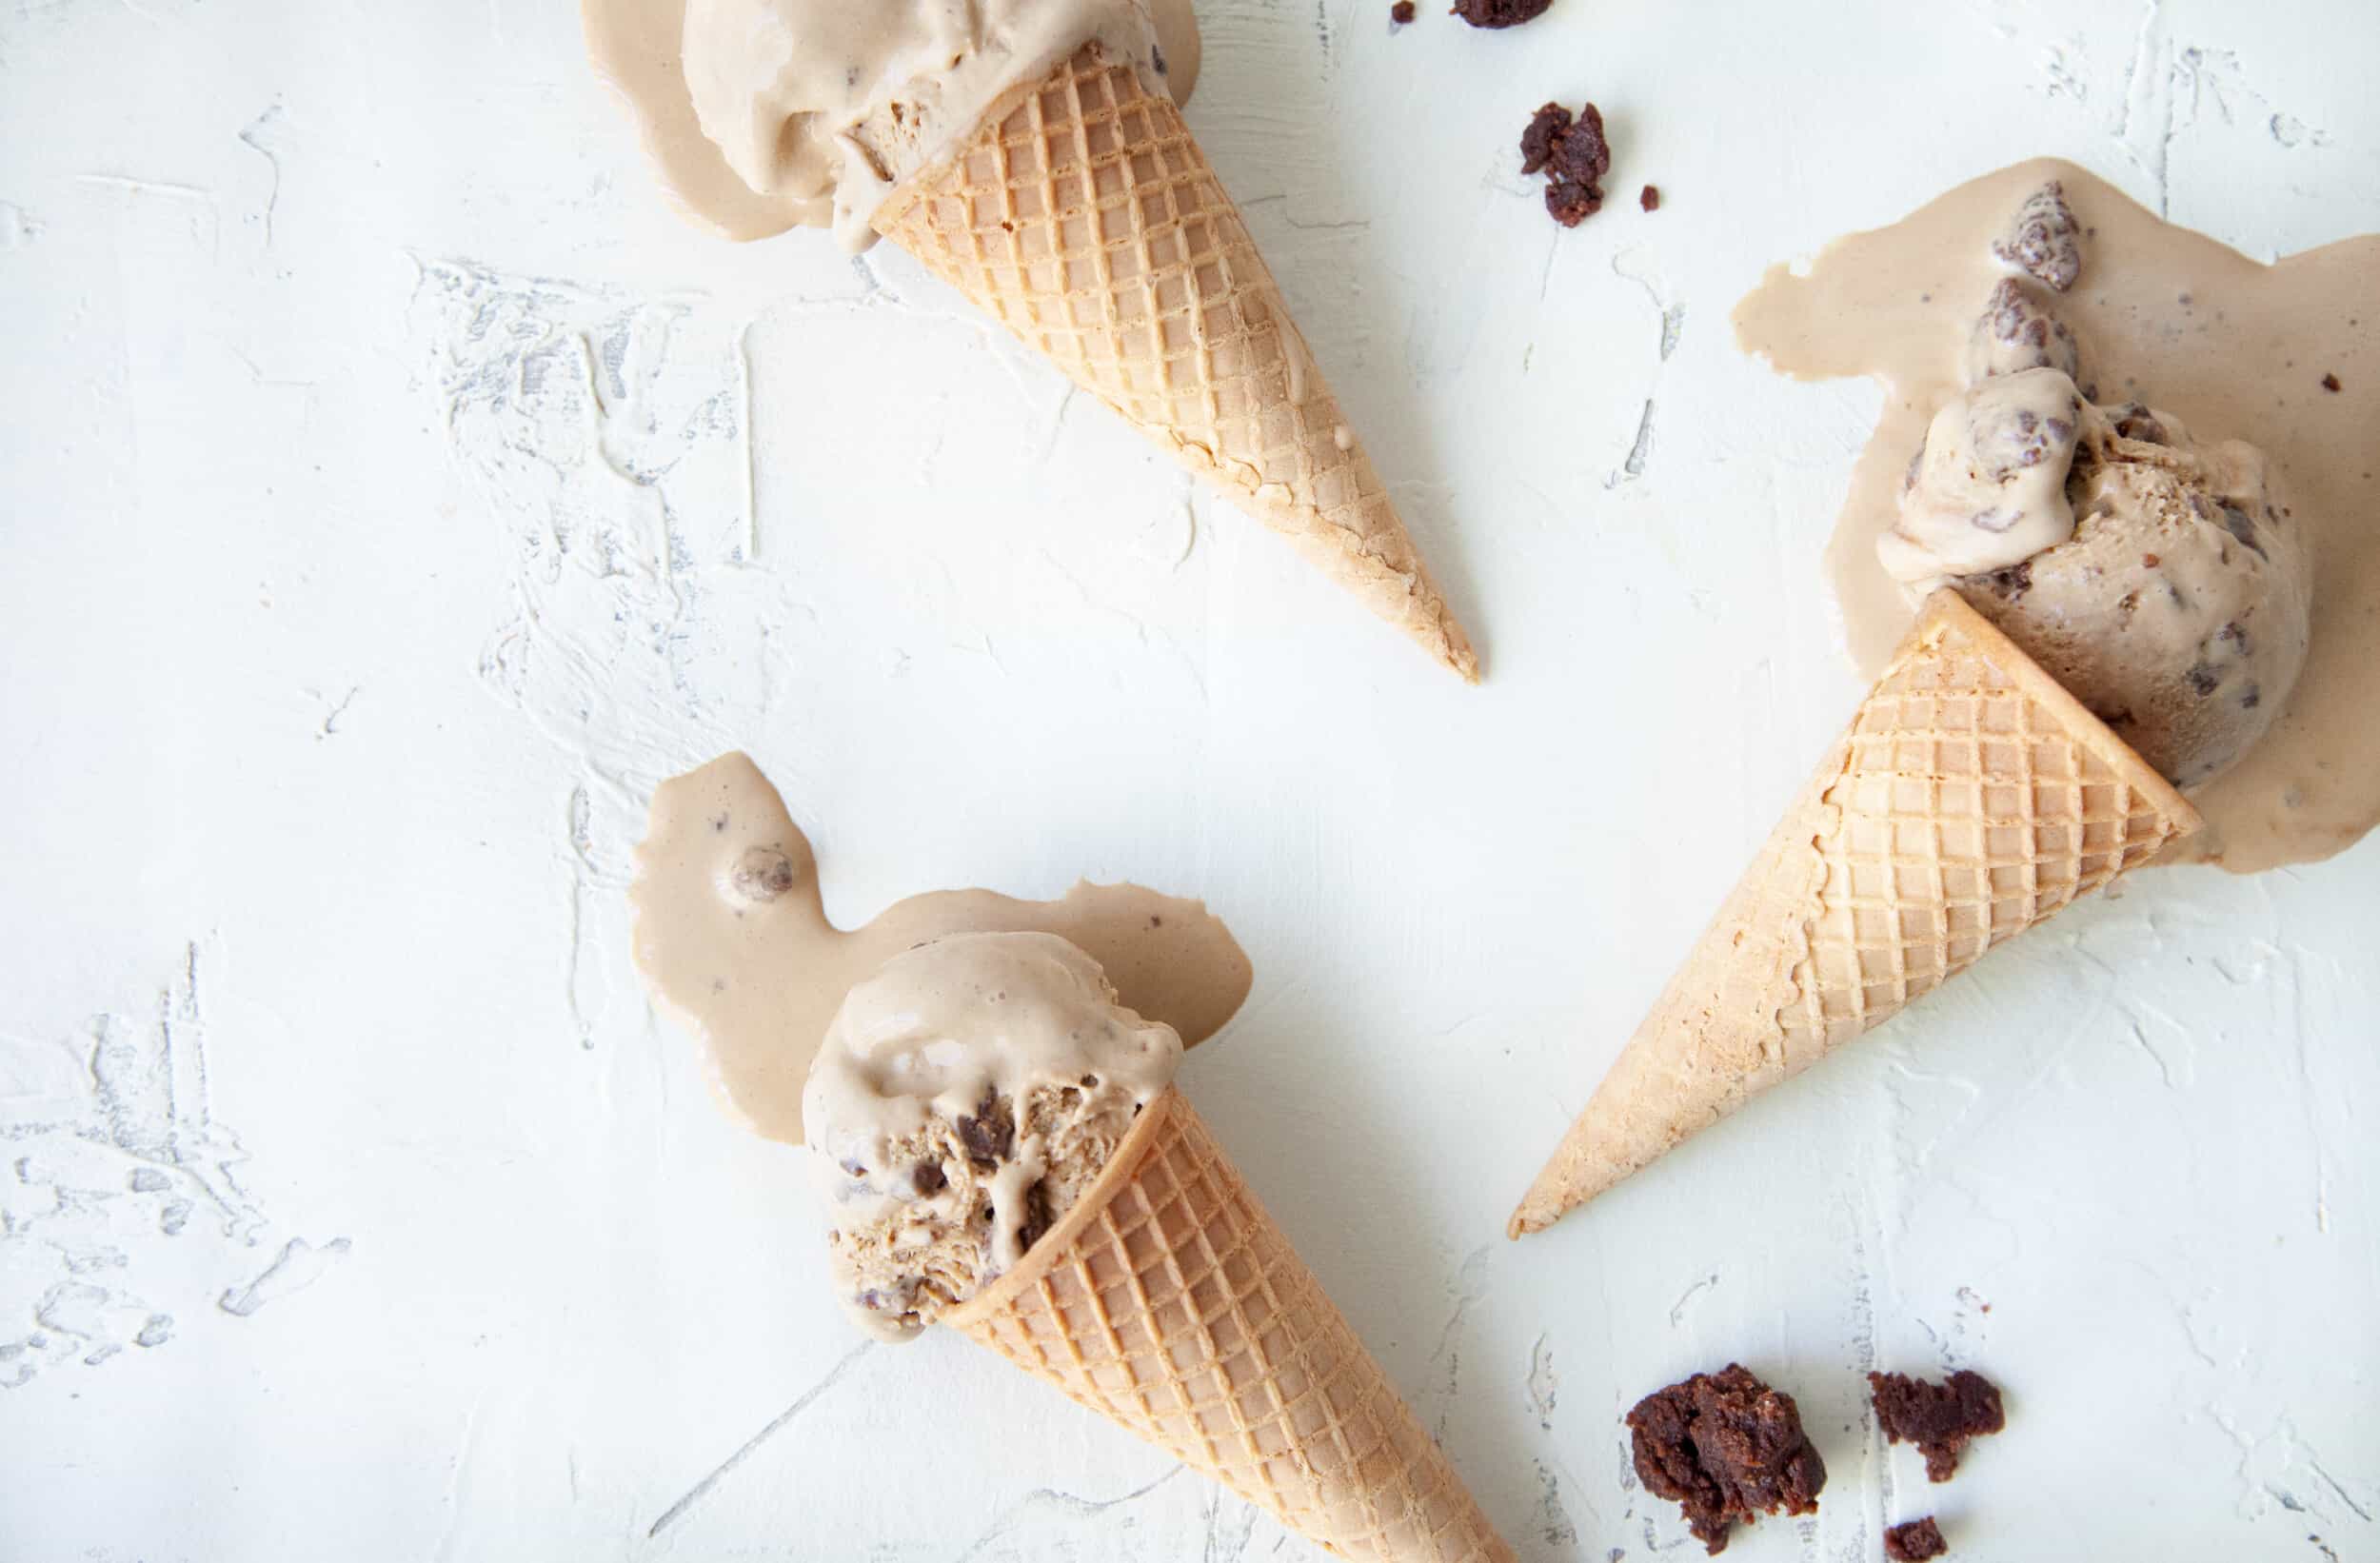 Coffee and brownie ice cream melting in ice cream cones